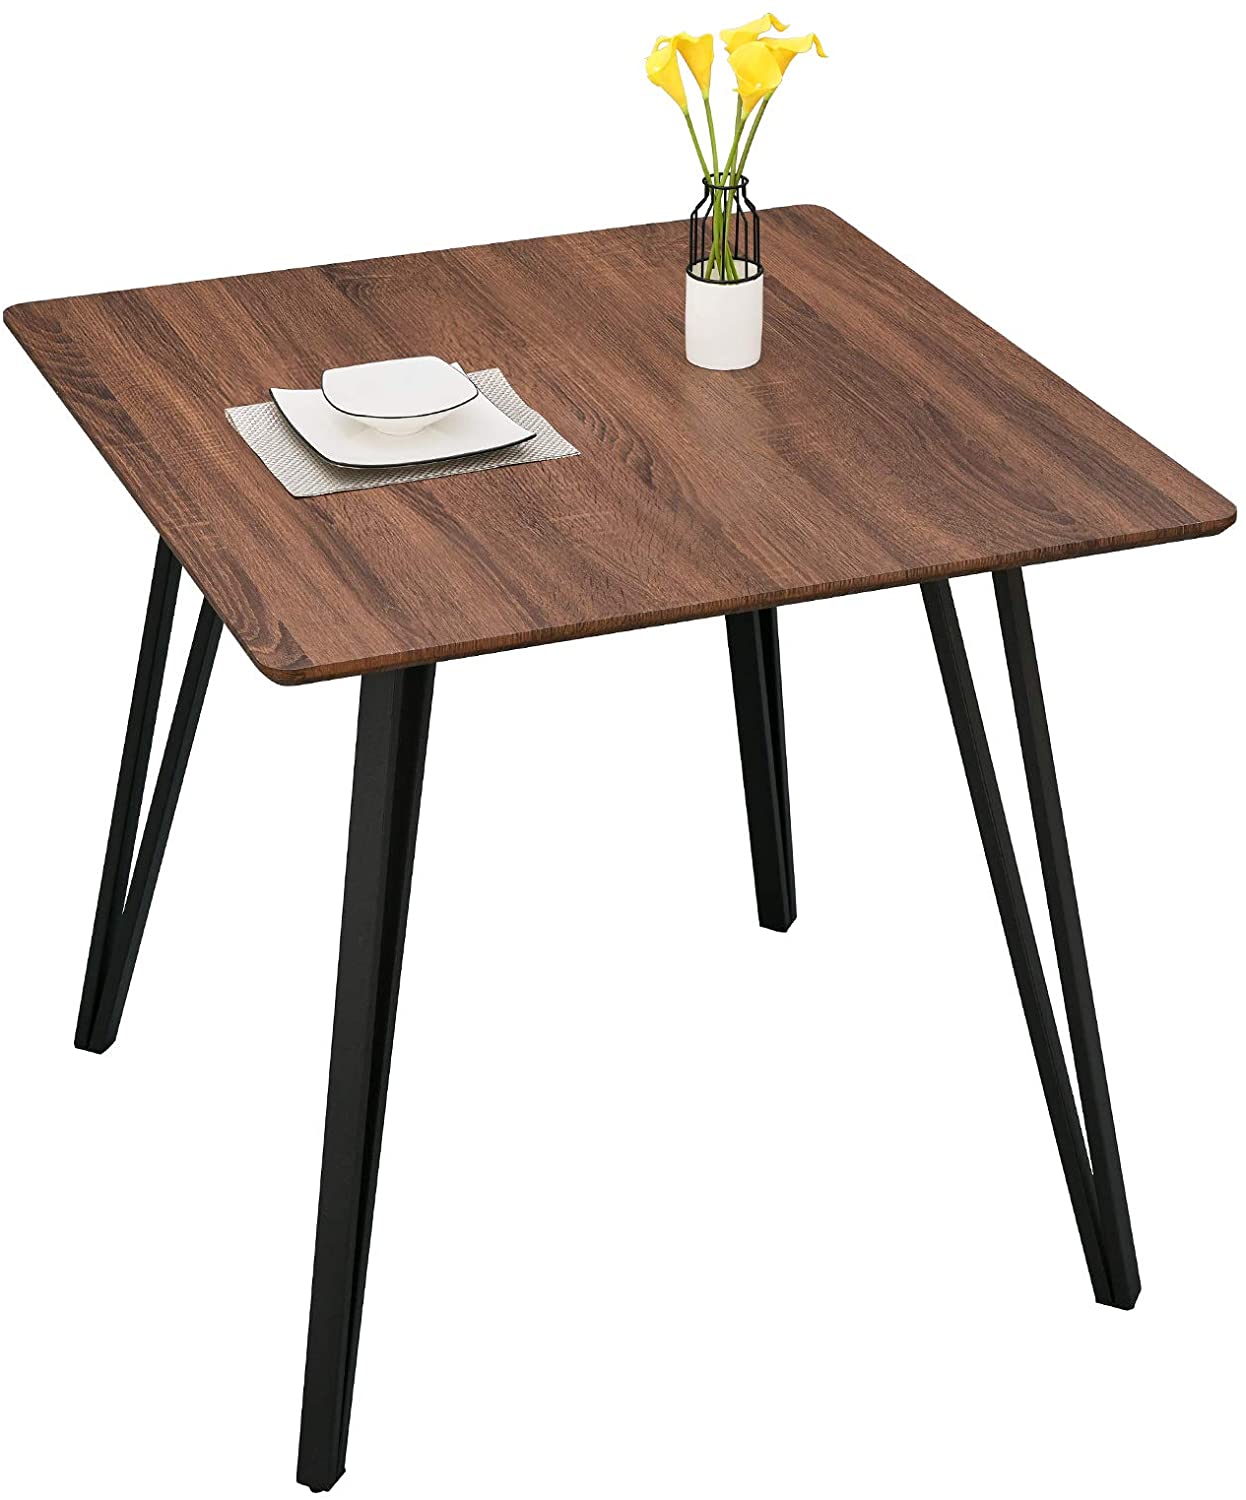 B08GC3HYRW GreenForest 31.5’’ Dining Table Small Square Kitchen Room Table Modern Industrial Wooden Leisure Coffee Table with Solid Metal Legs for Living Room Computer Desk, Walnut